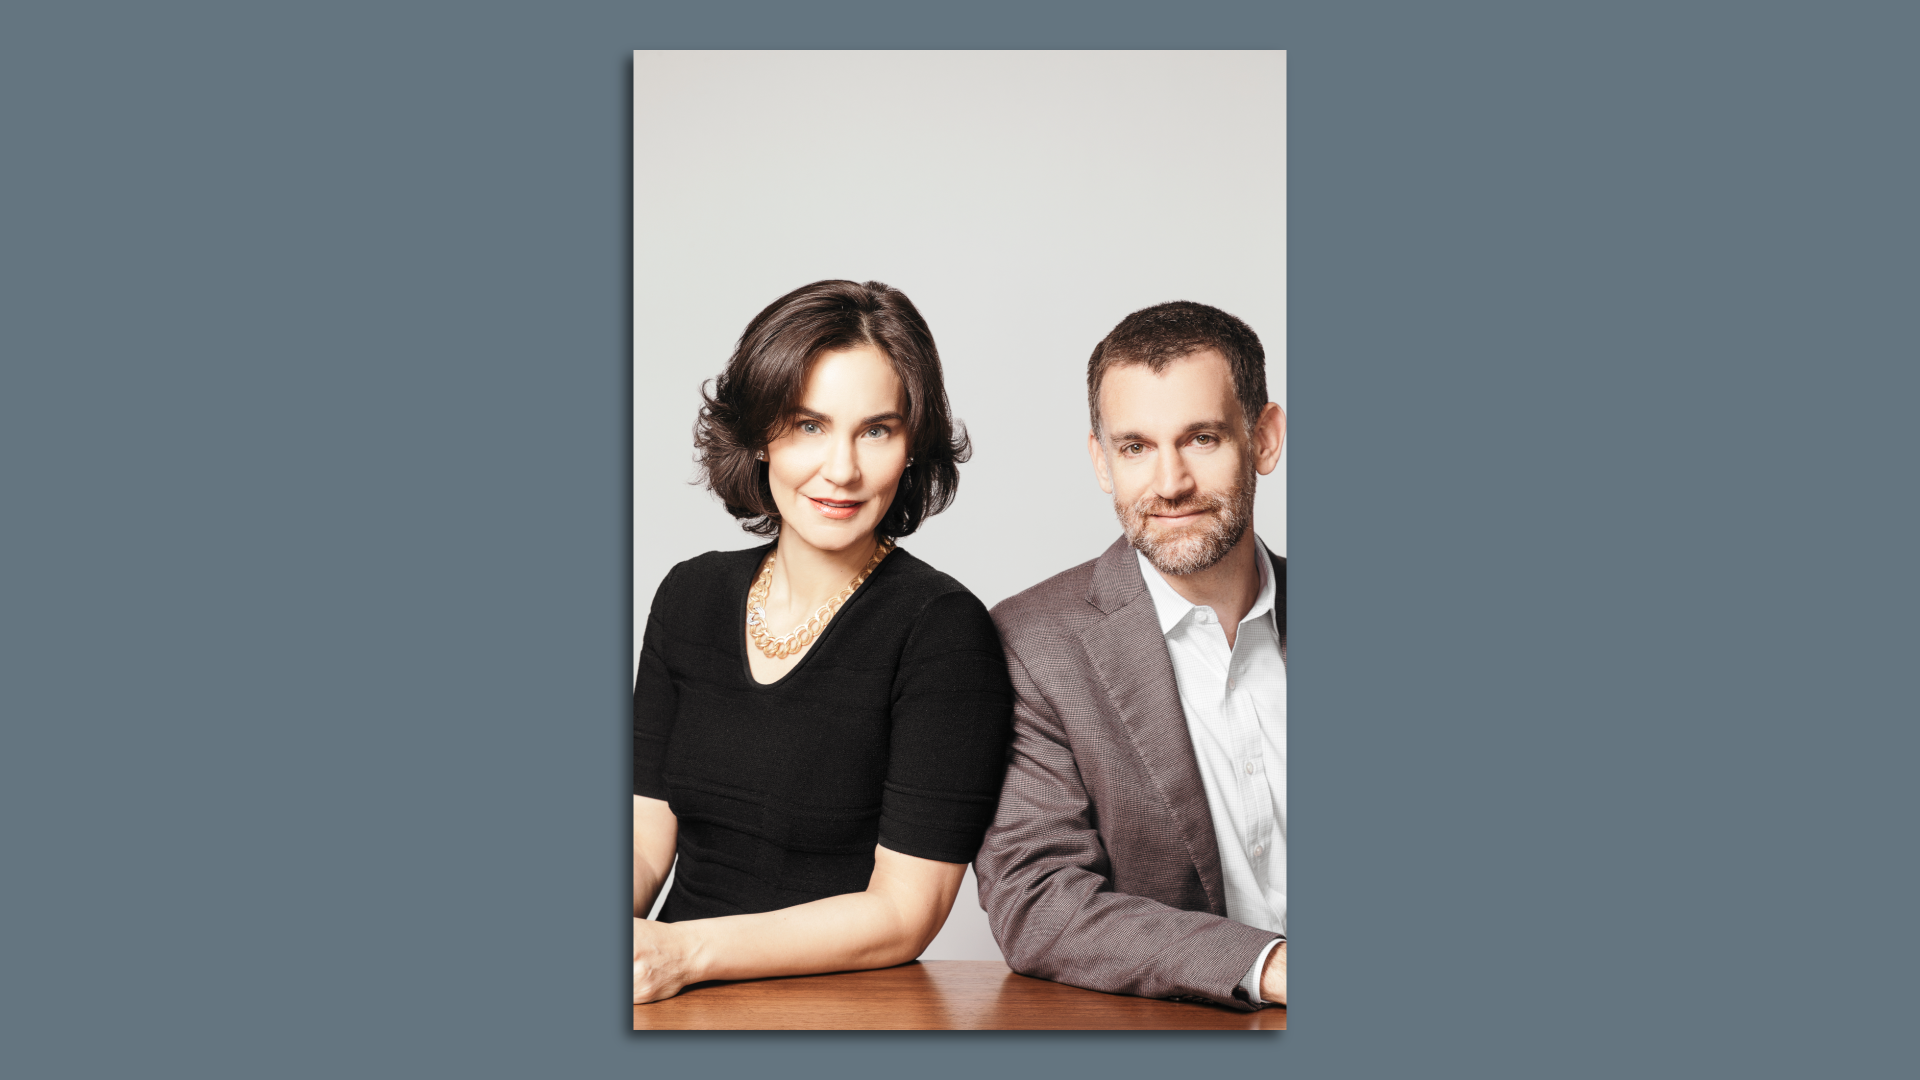 Laura and John Arnold pose for a photo while sitting at a desk